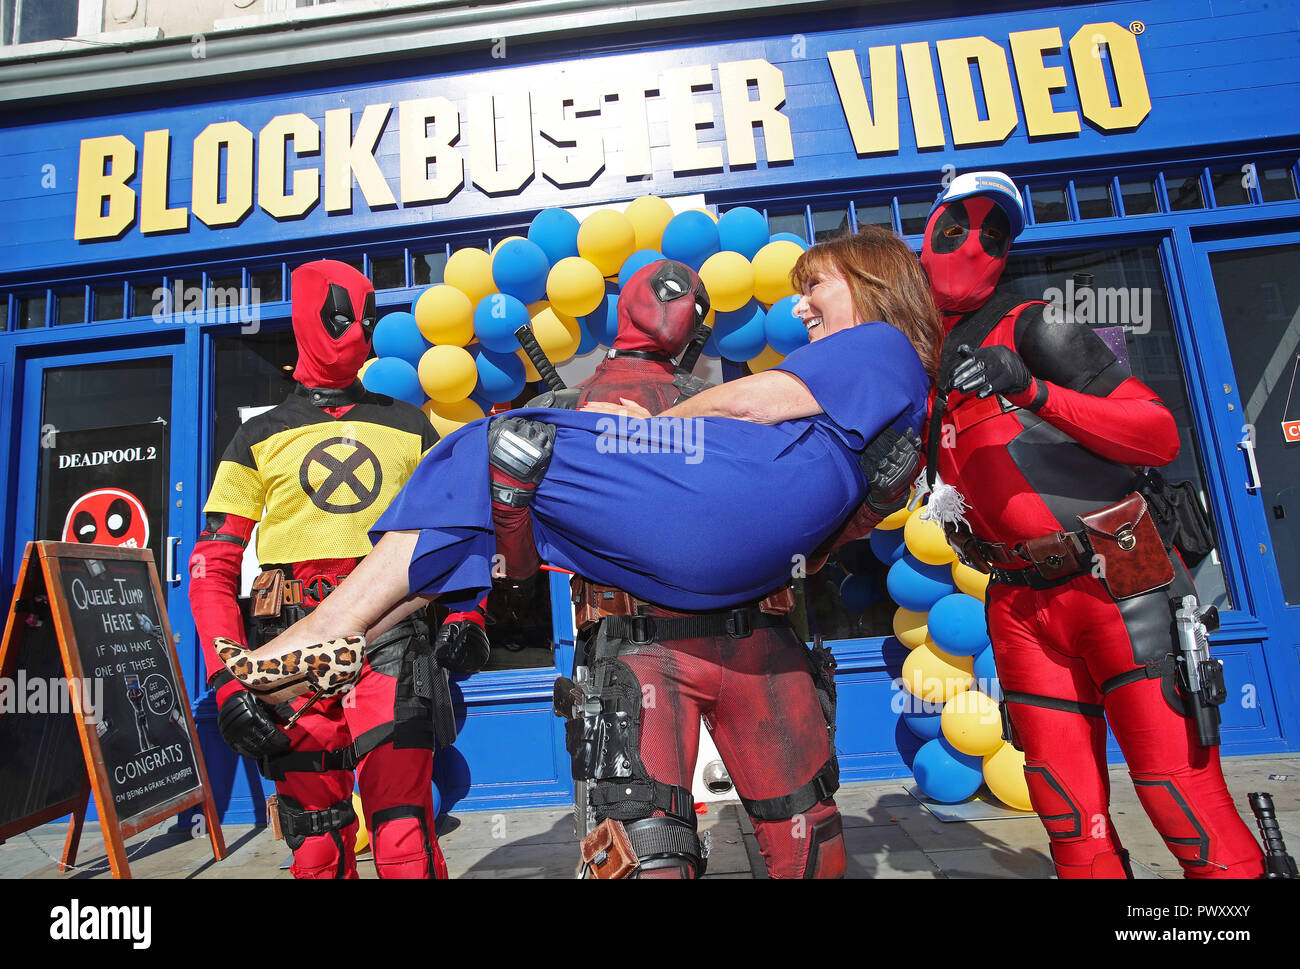 Be Kind Rewind... Deadpool fan Lorraine Kelly and Cosplayer Ryan Payne turn  back the clocks to open a brand new Blockbuster Video pop-up in Shoreditch.  The store has opened up for two